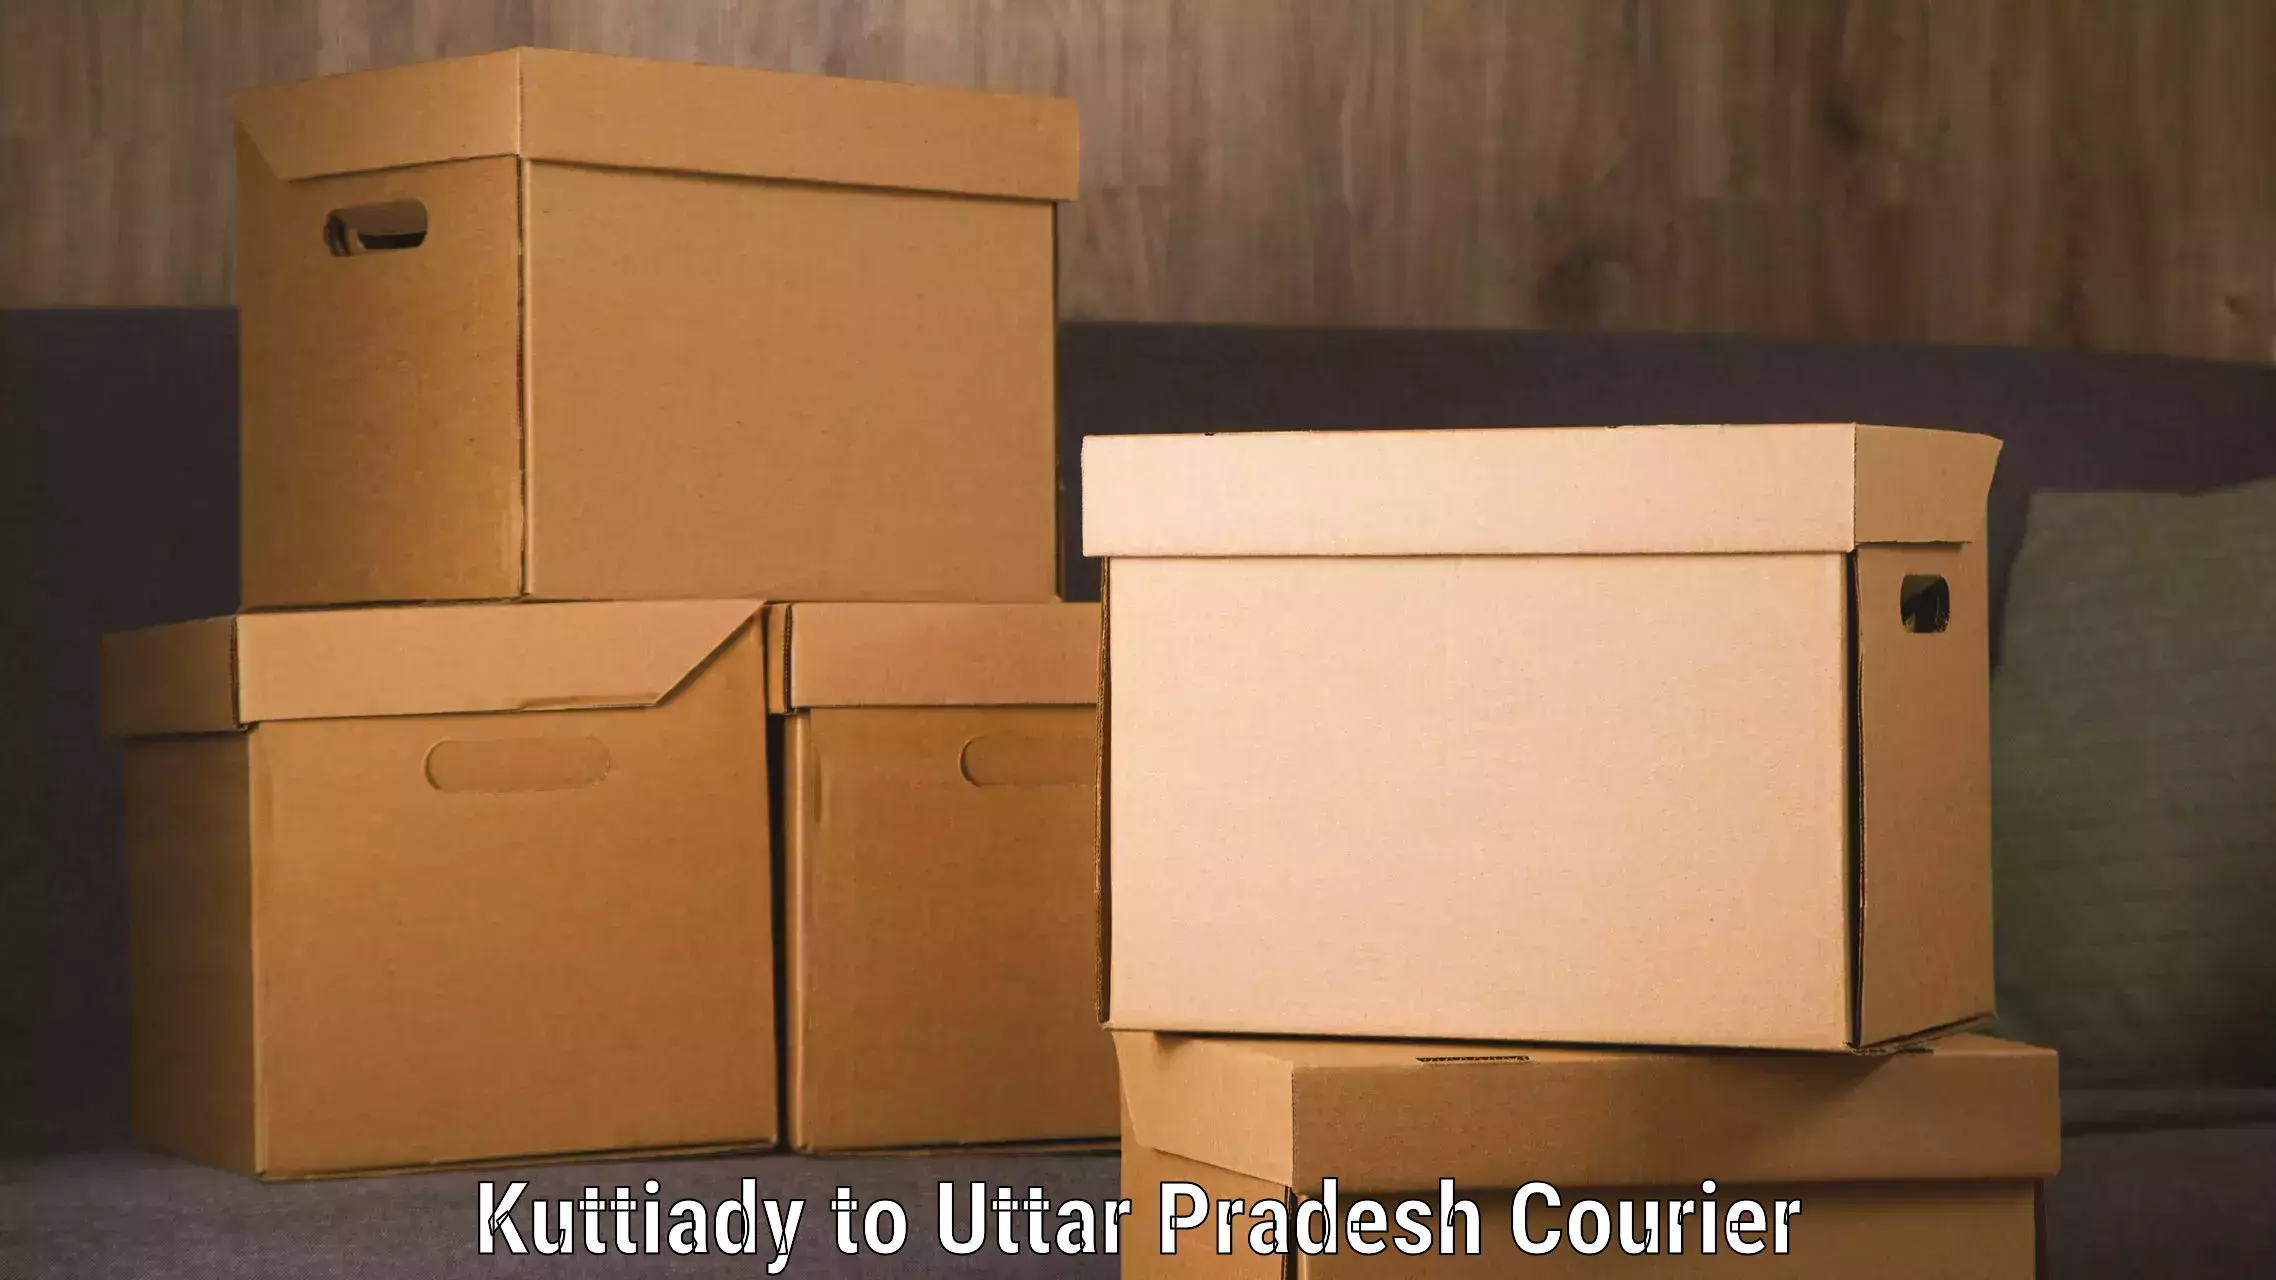 Automated parcel services Kuttiady to Agra